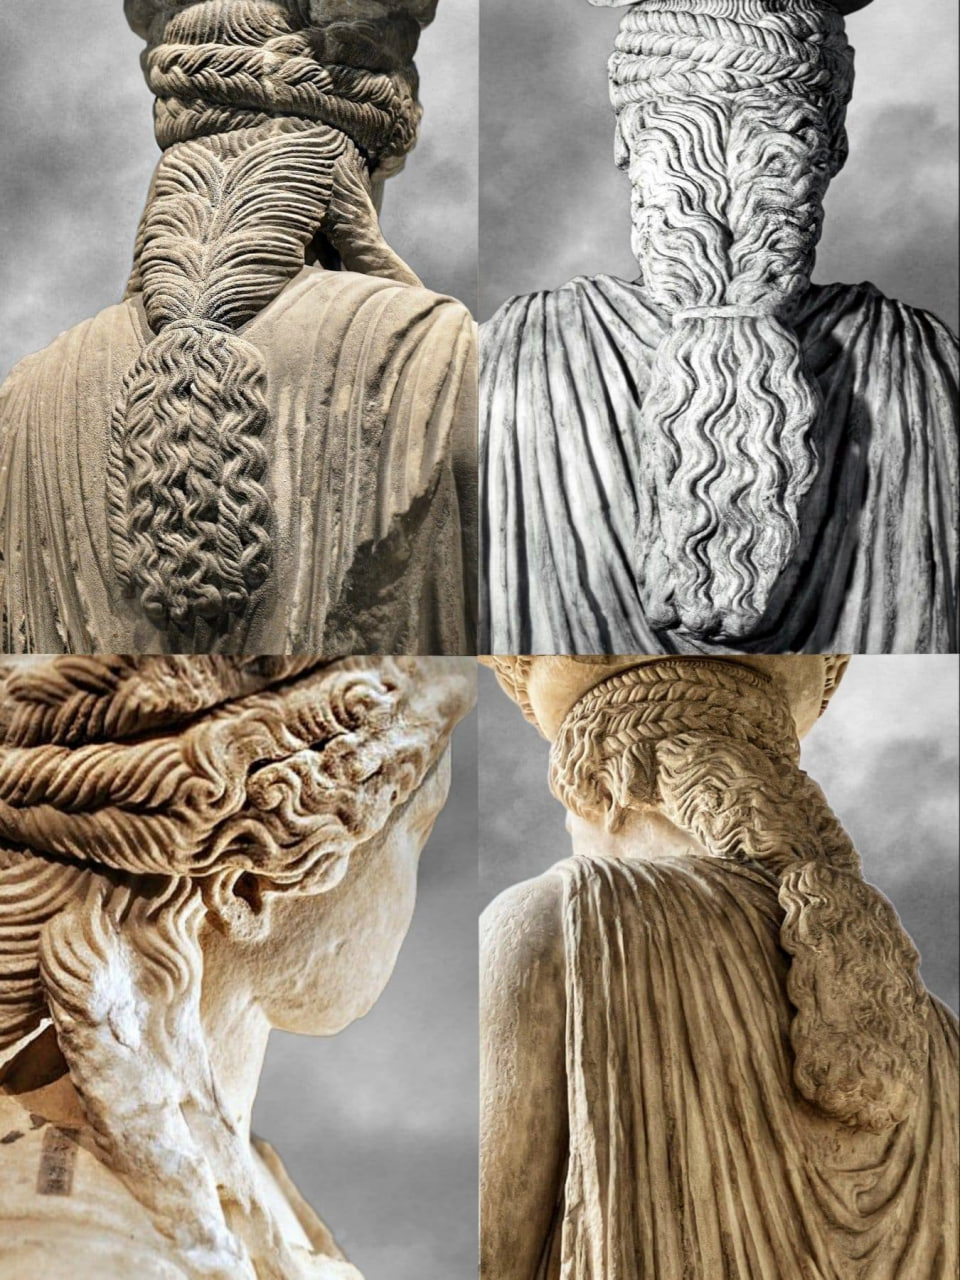 Unraveling the Beauty: The Exquisite and Elegant Braided Hair of the Caryatids